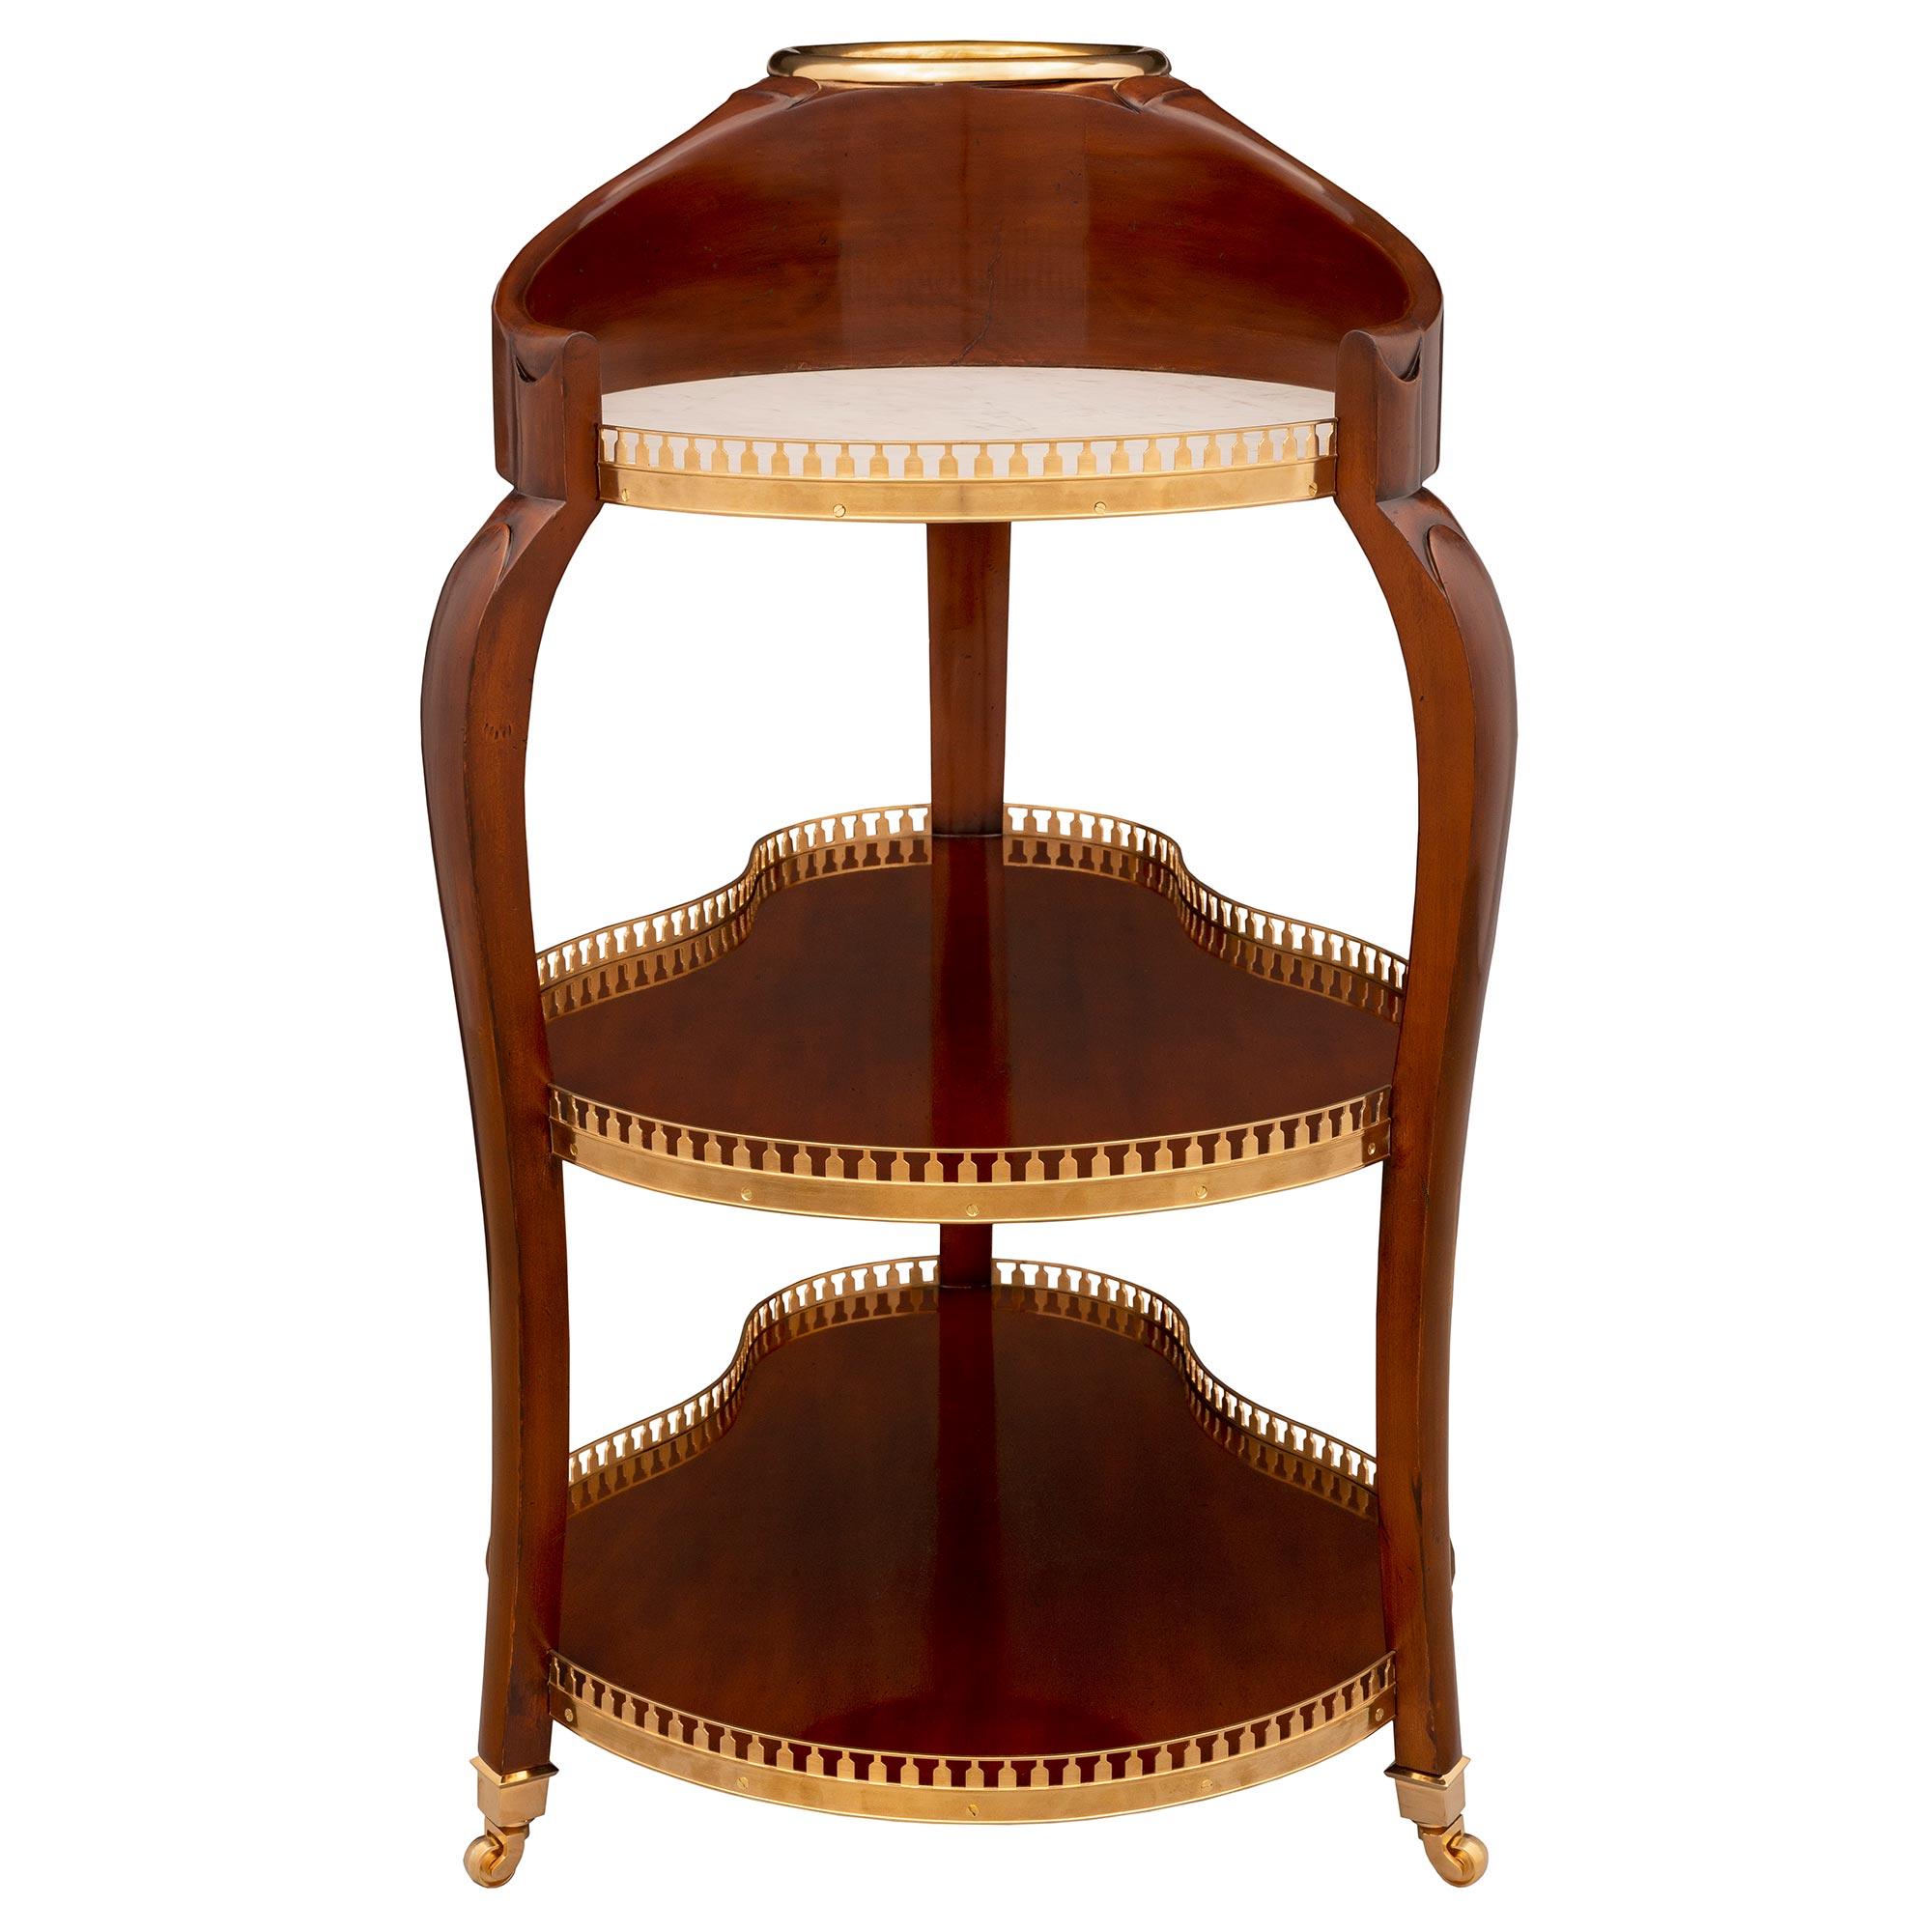 A most elegant and extremely unique French turn of the century Louis XV St. mahogany, ormolu, and white Carrara marble Rafraichissoir side table/bar cart. The bar cart is raised by its original casters below three elegantly curved legs. Each leg is